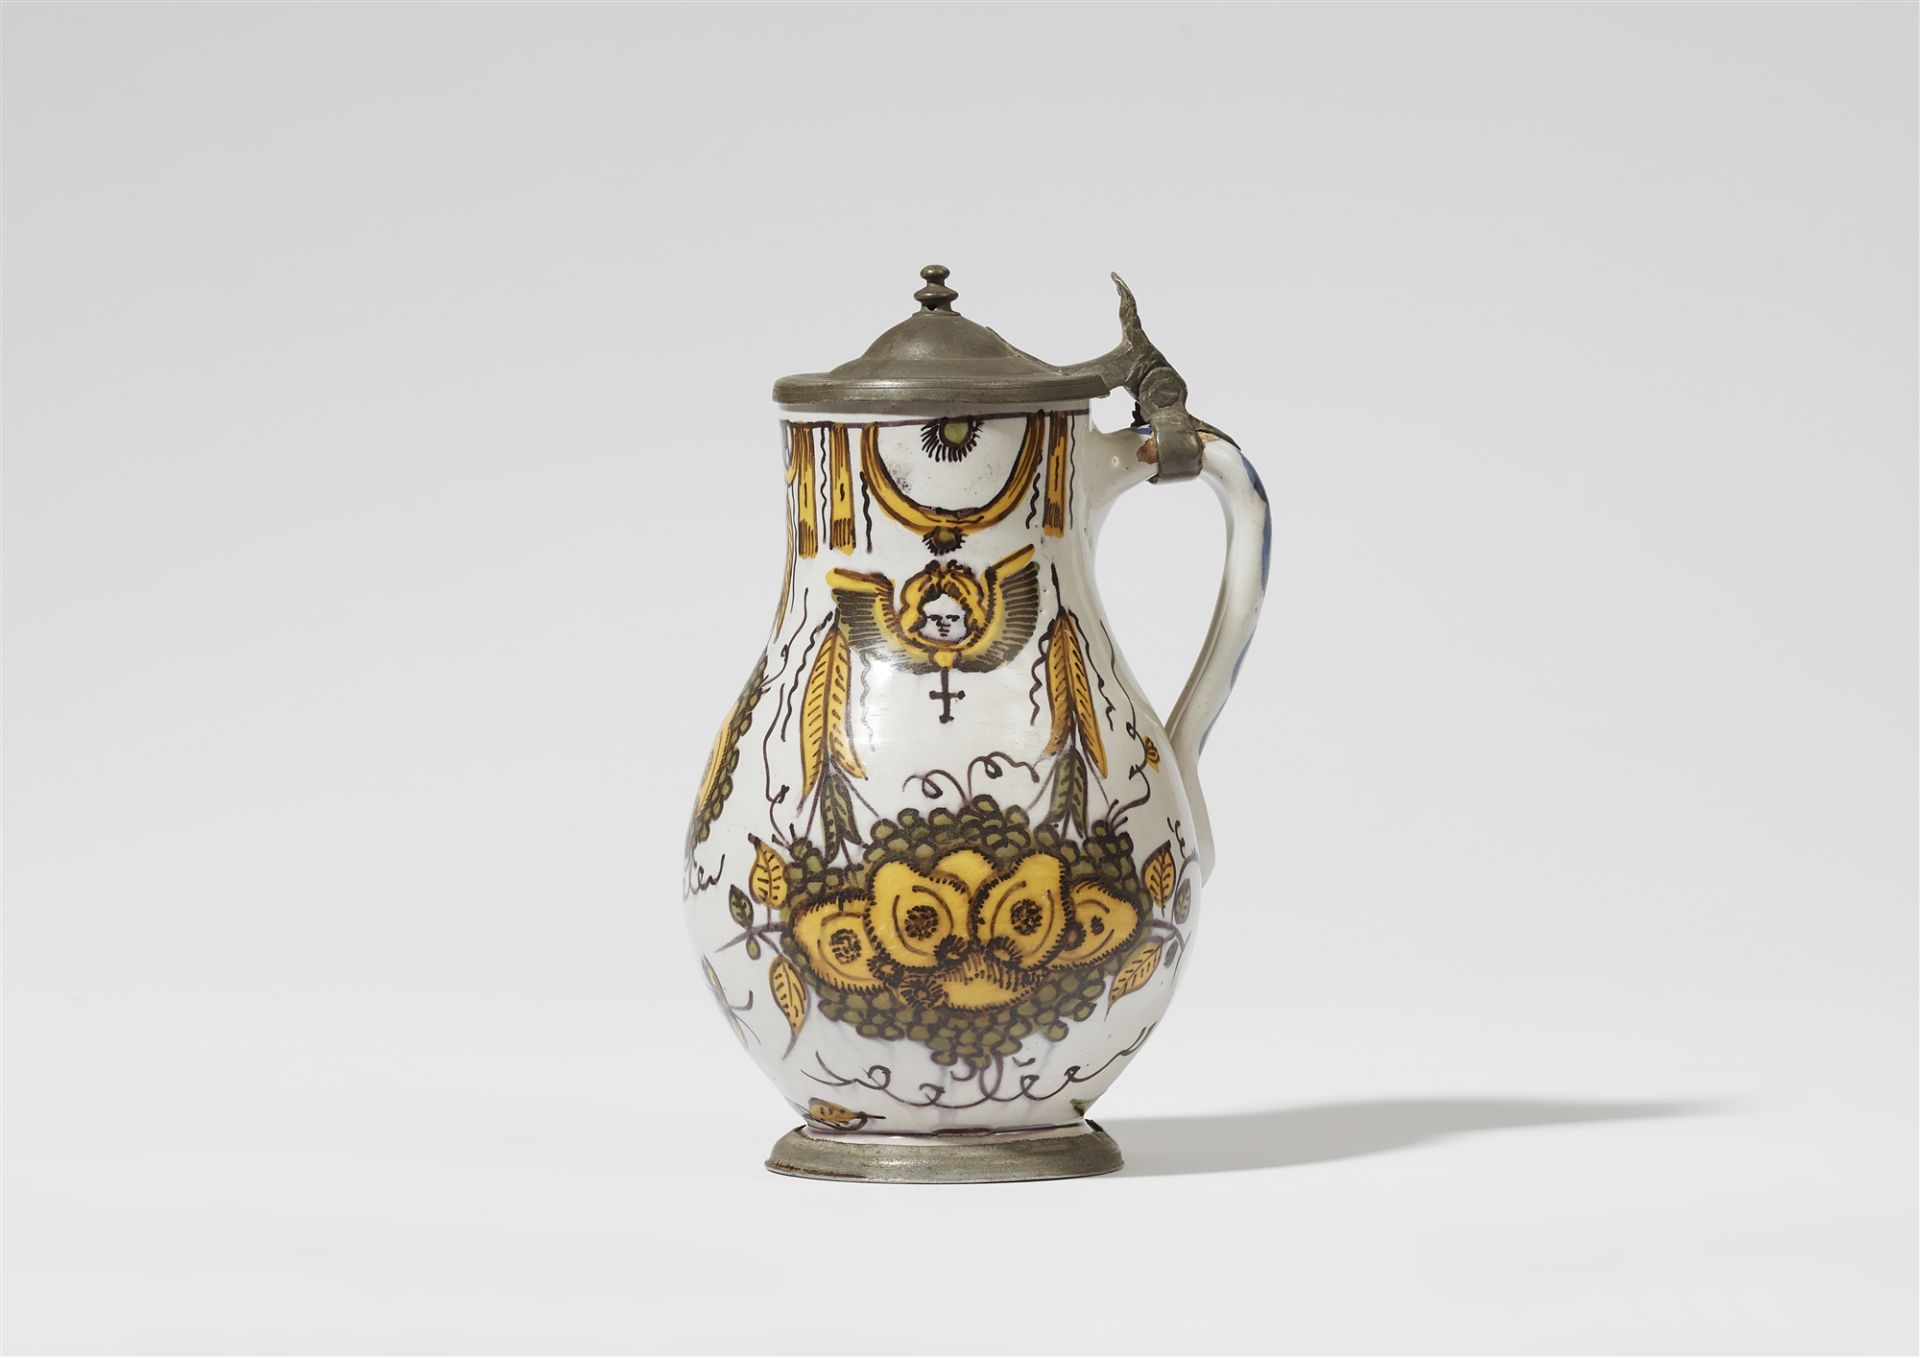 A faience jug with a fruit still life and angels